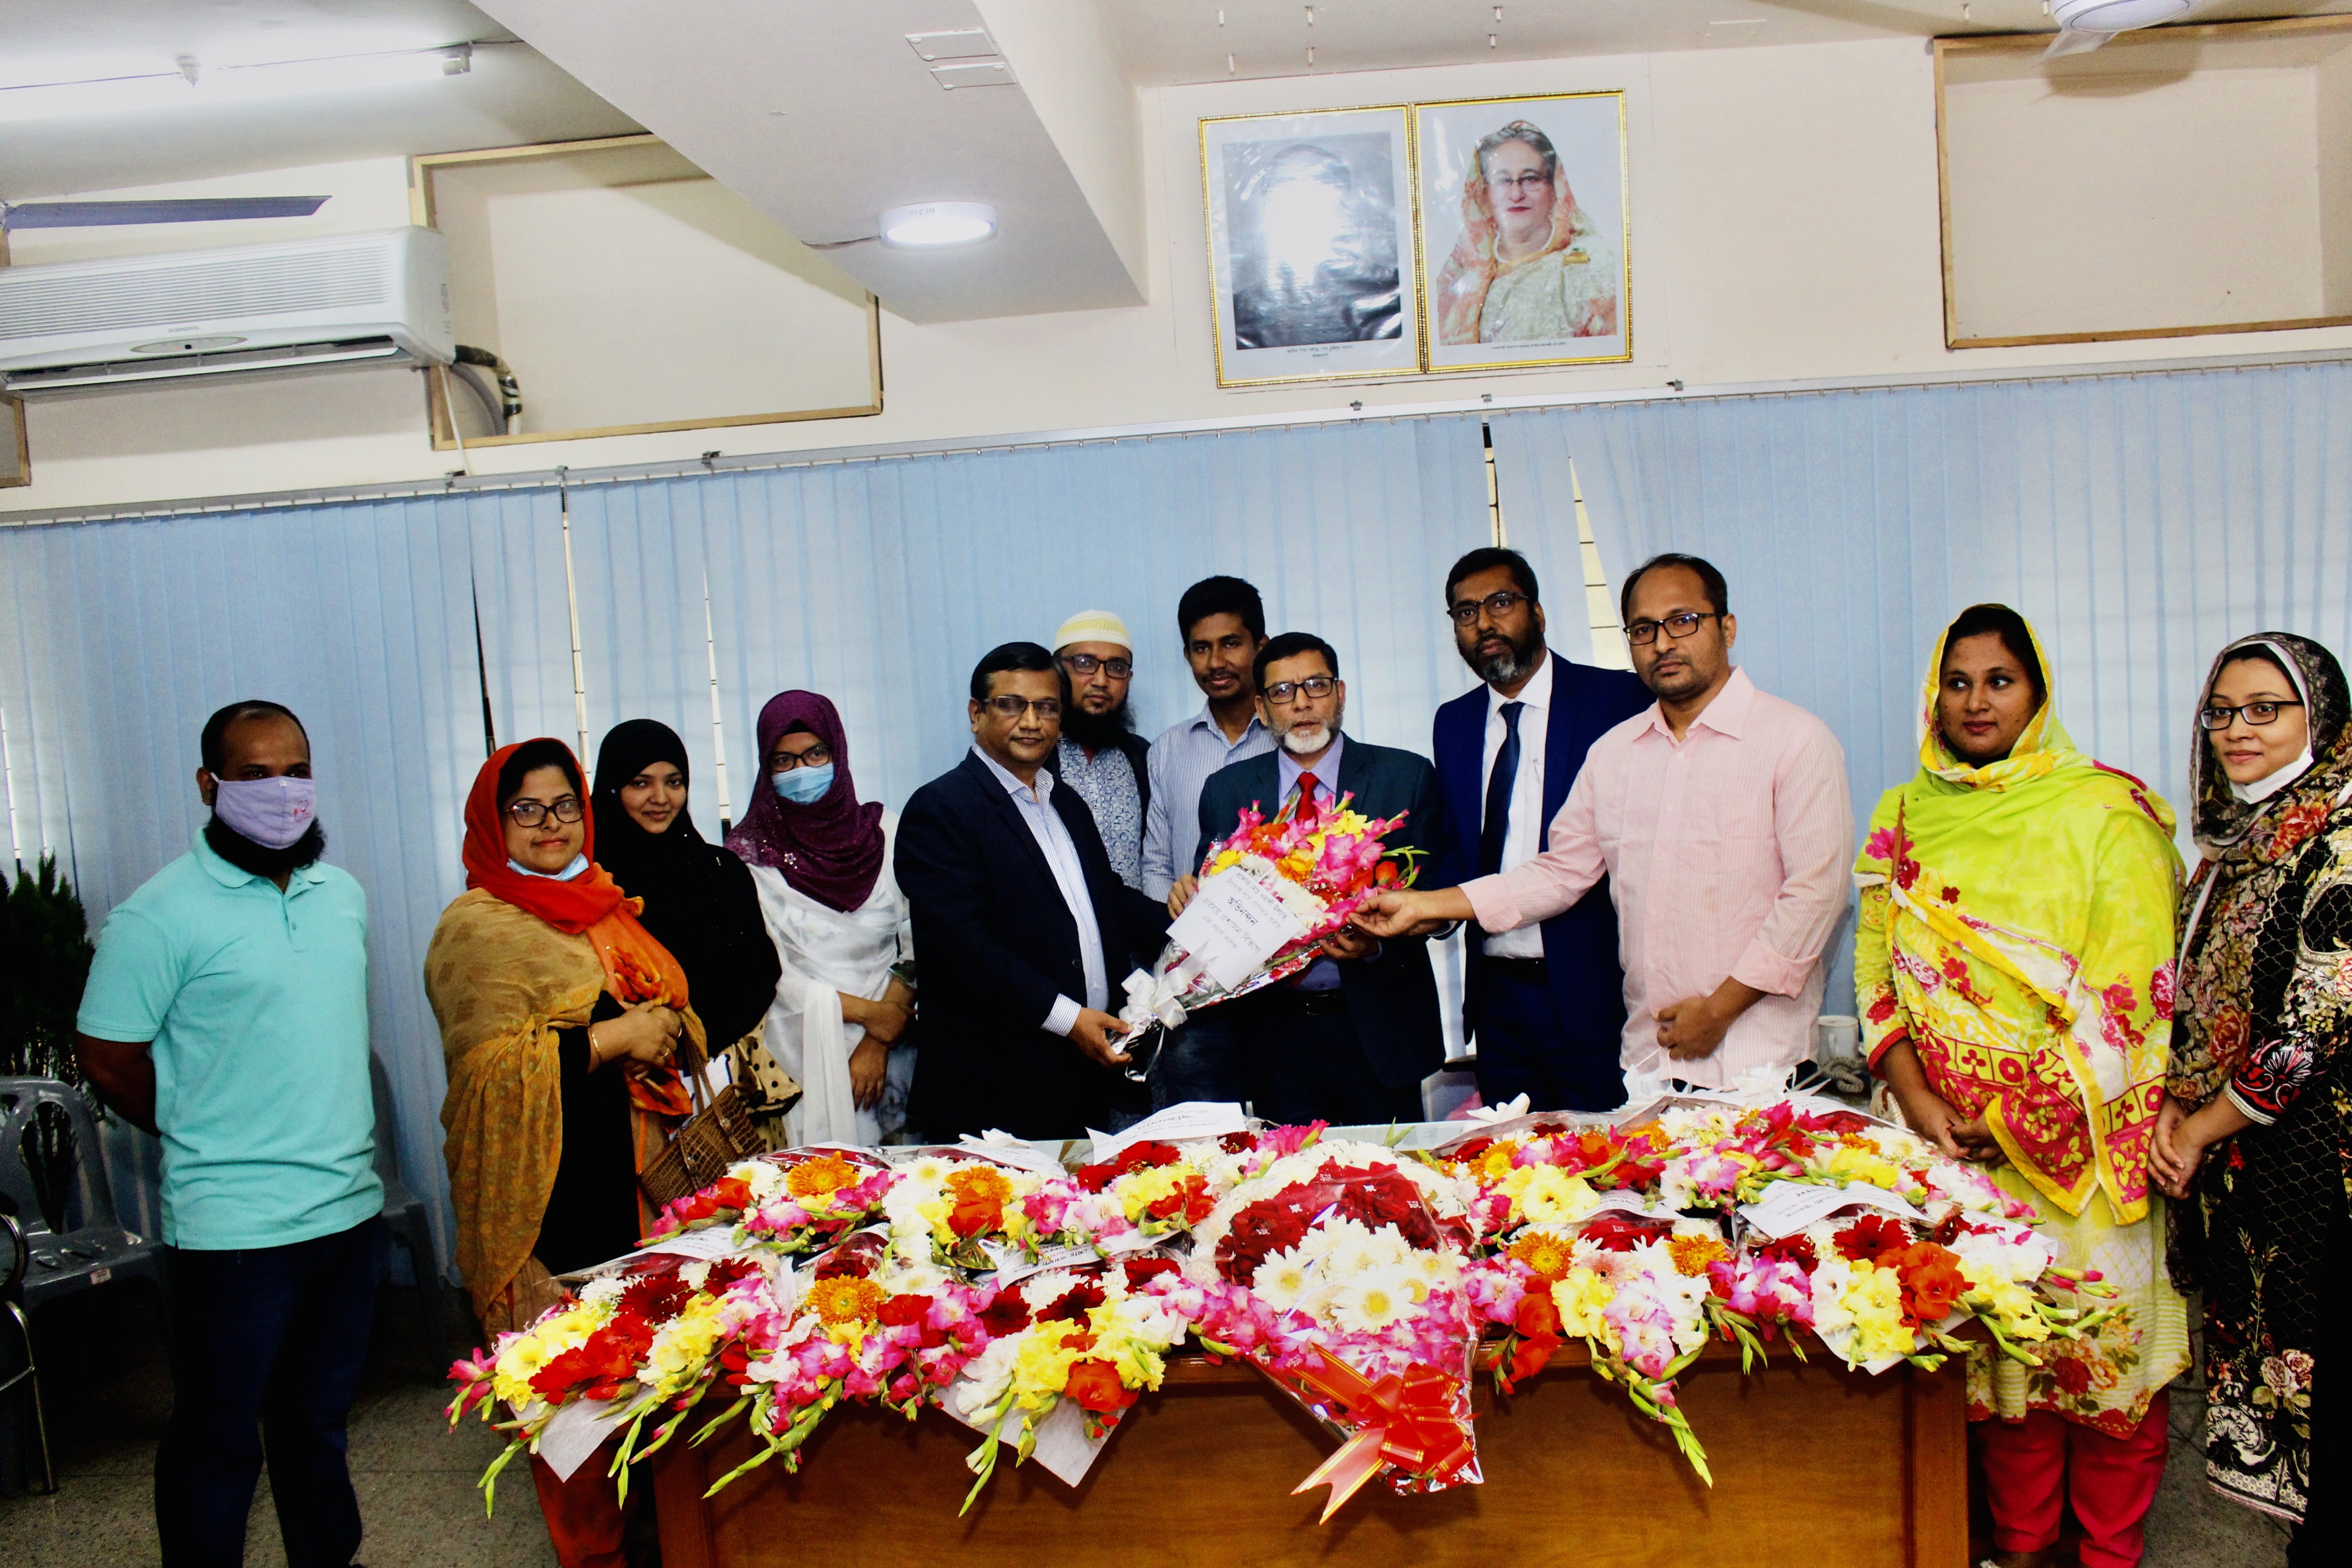 Reception to Vice Principal Prof. Md. Wali Ullah by Business Administration Department